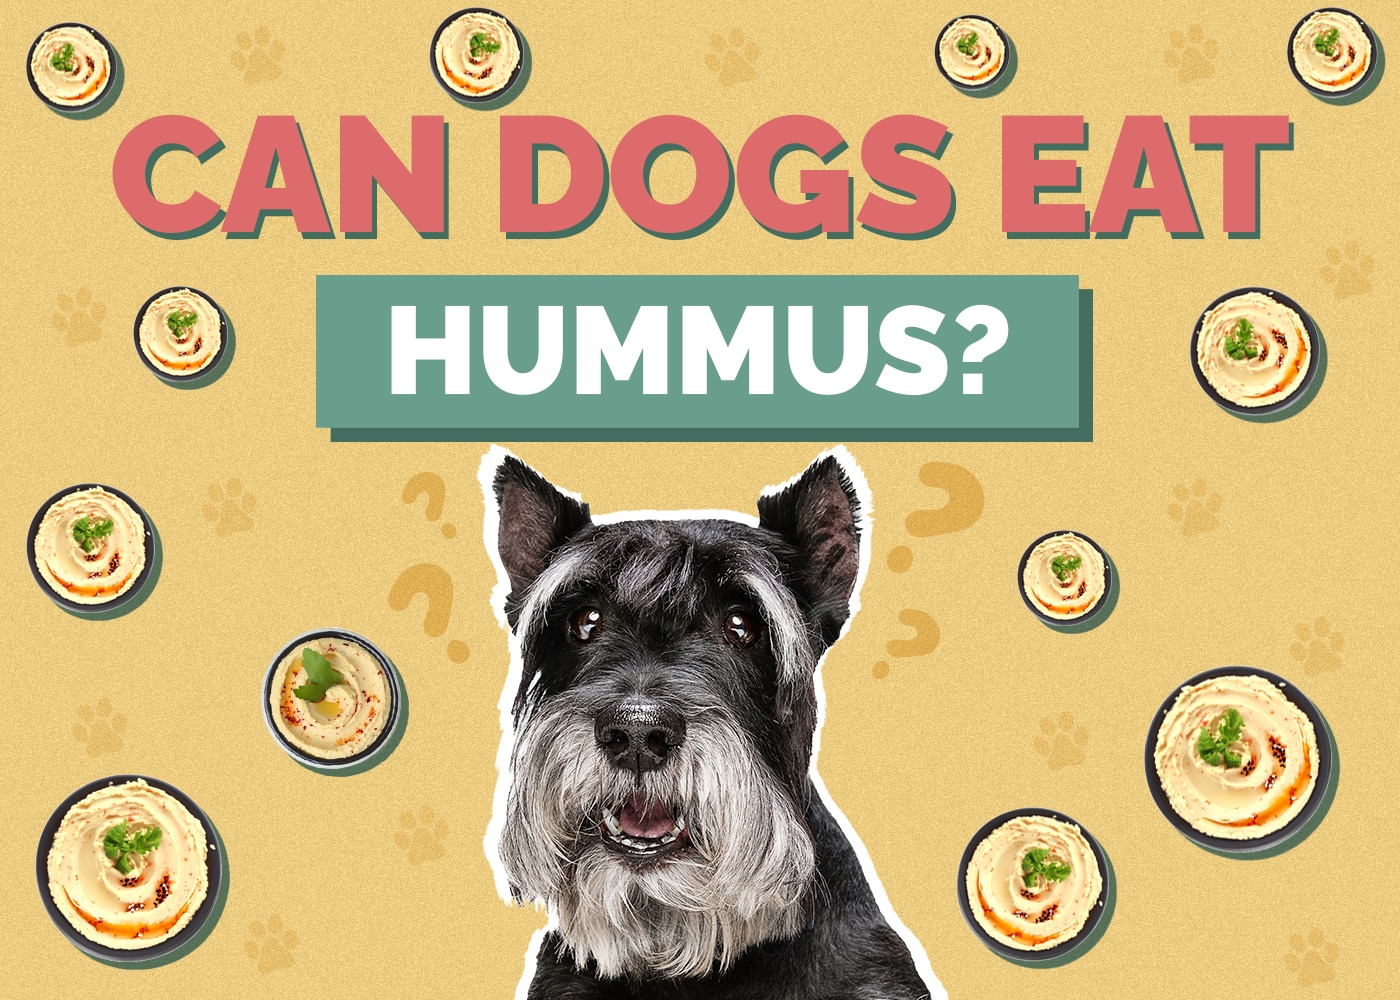 Can Dogs Eat hummus